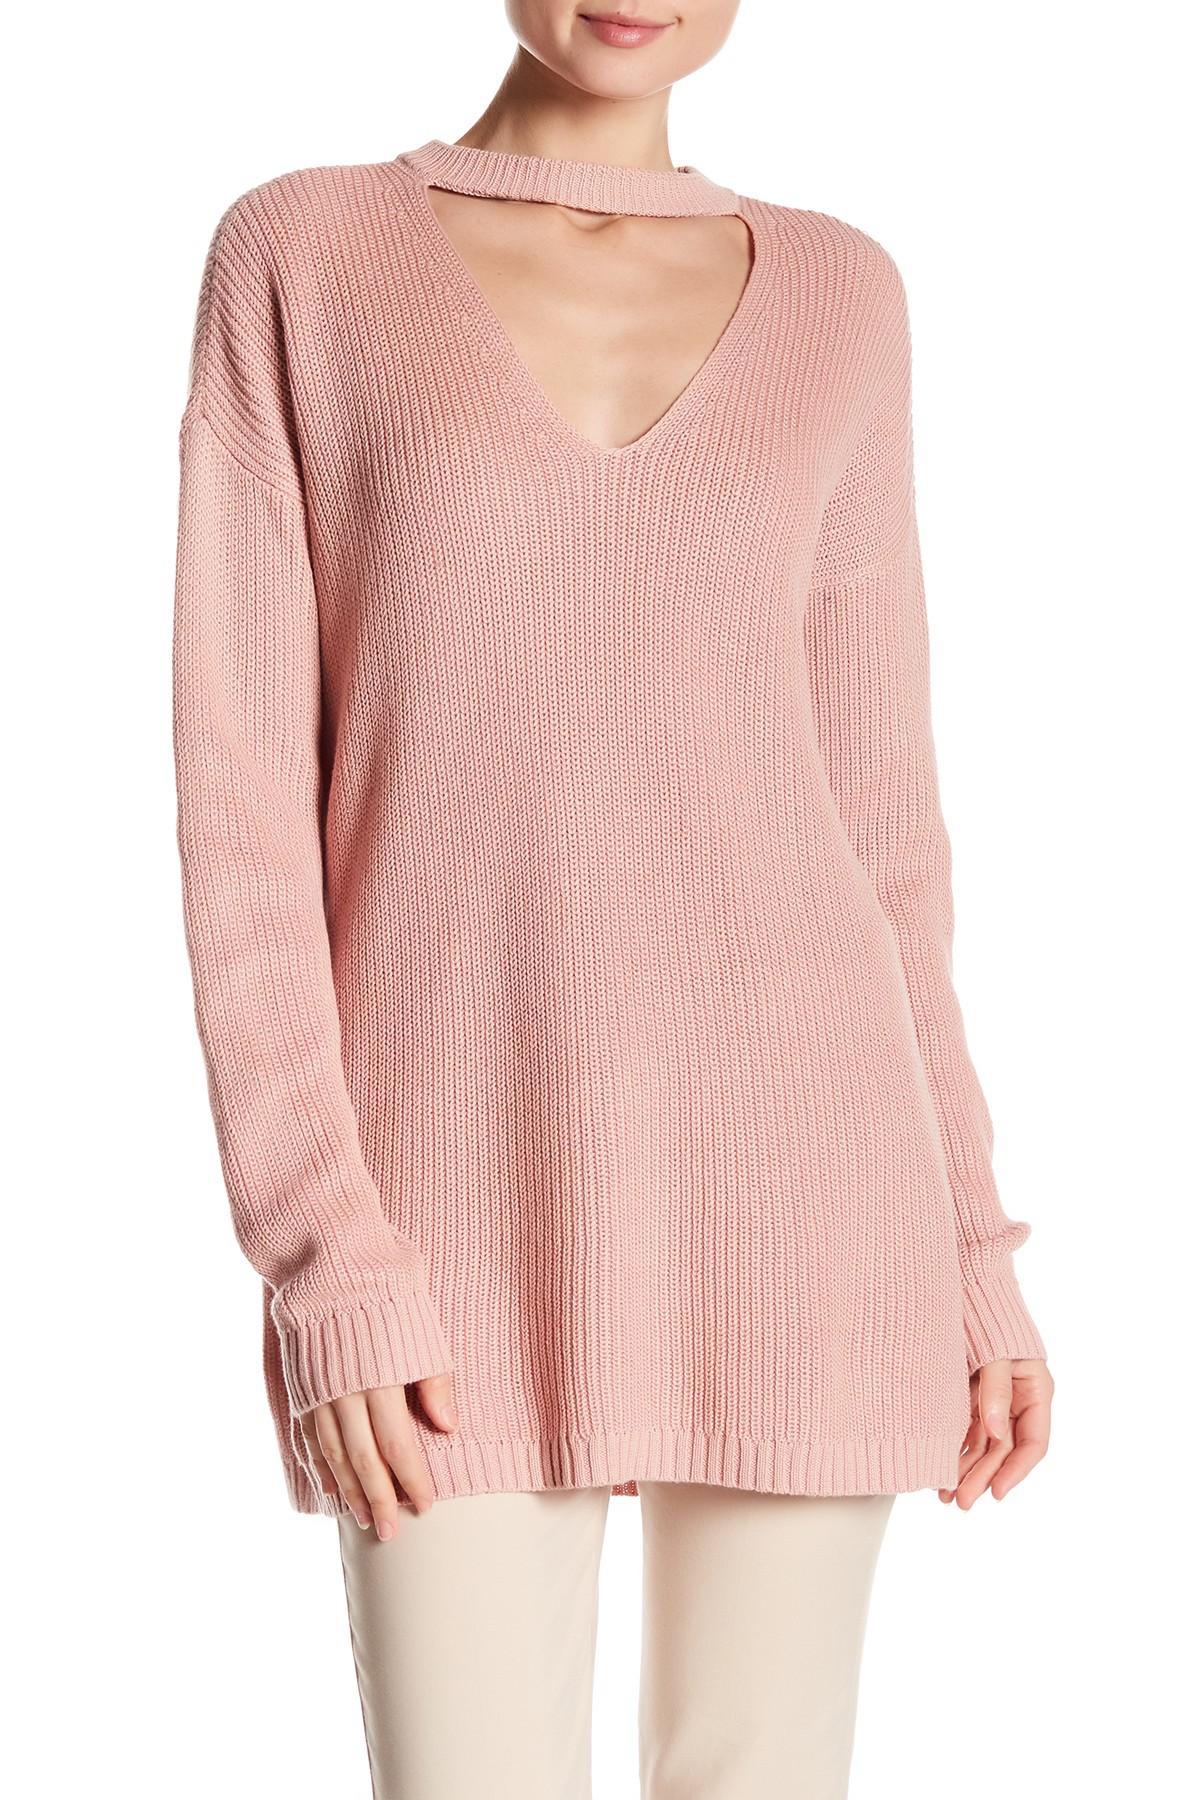 Lyst - Vince Camuto Textured Knit Choker Sweater in Pink